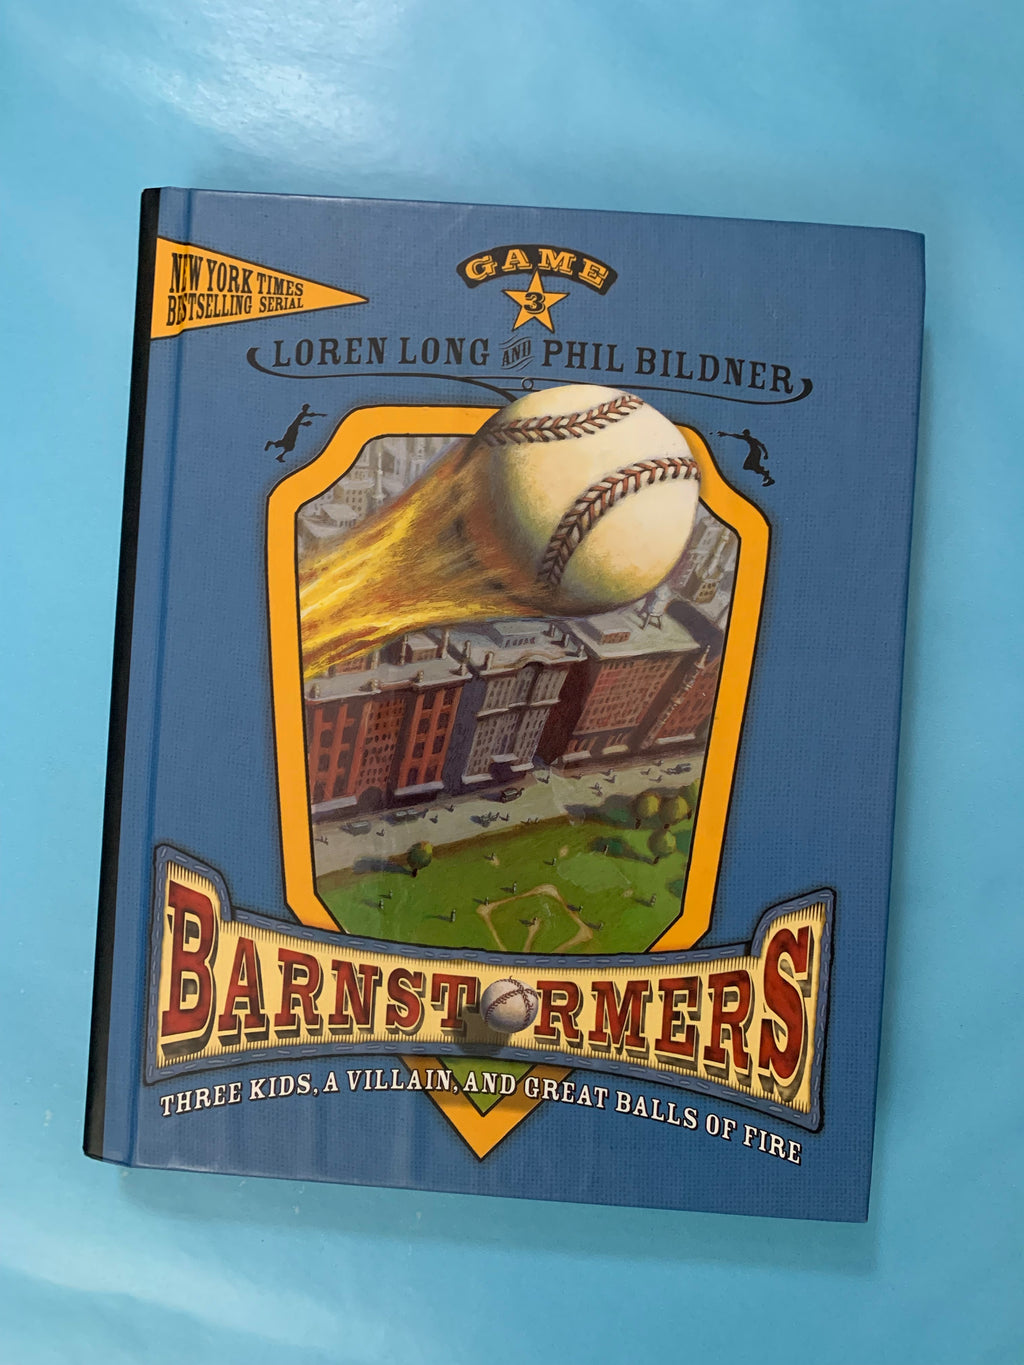 Barnstormers: Three Kids, A Villain, and Great Balls of Fire- By Loren Long and Phil Bildner